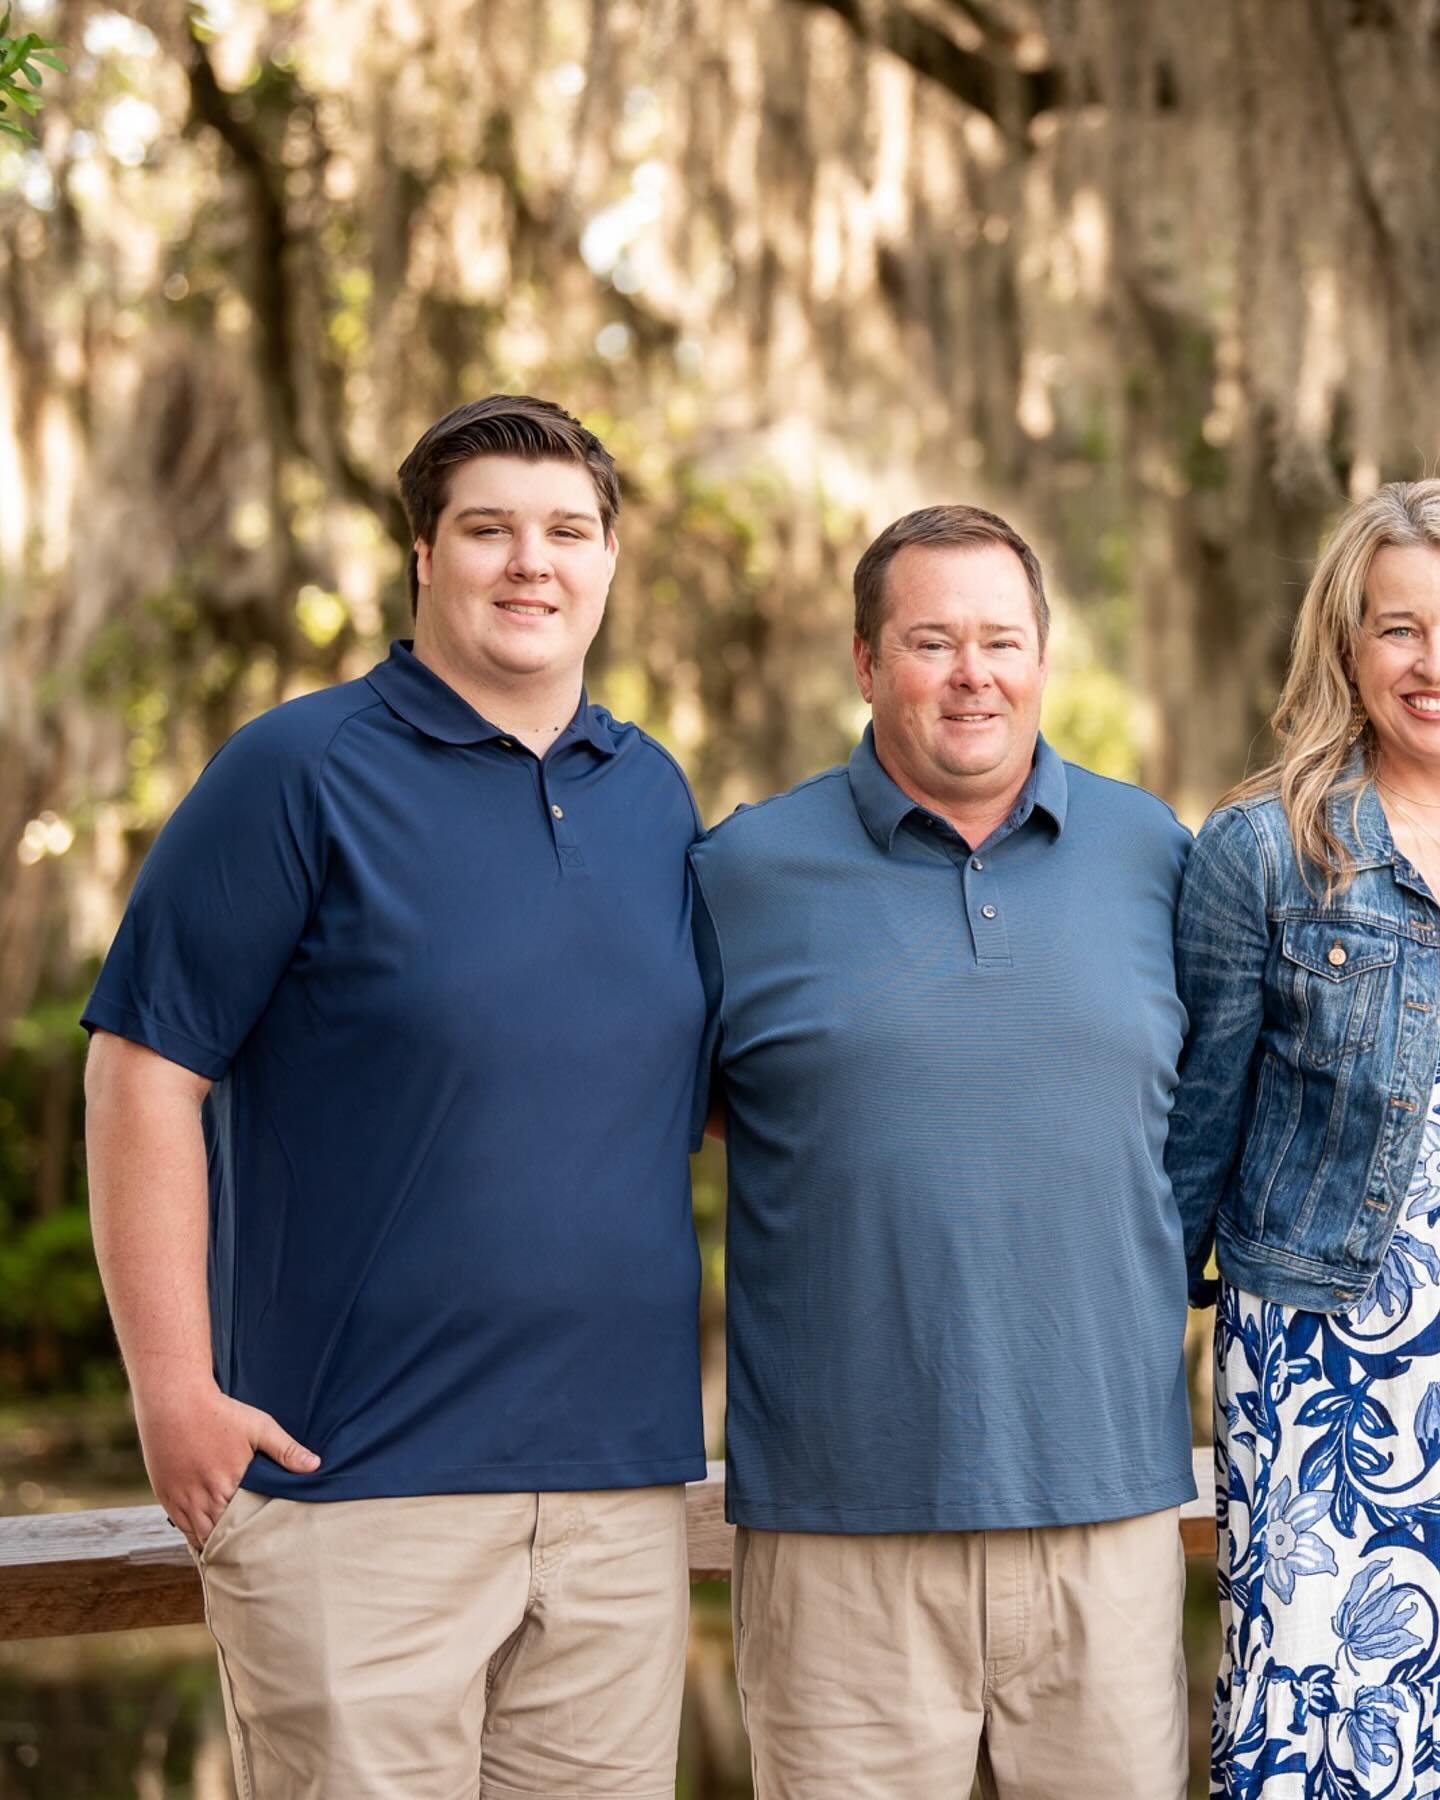 Gorgeous morning with the Colby family at Airlie Gardens last week. Love a combination senior/family portrait session!

#wilmingtonnc #wilmington #wilmingtonncphotographer #beach #family #familyphotographer #familygoals #toesinthesand #saltlife #coas